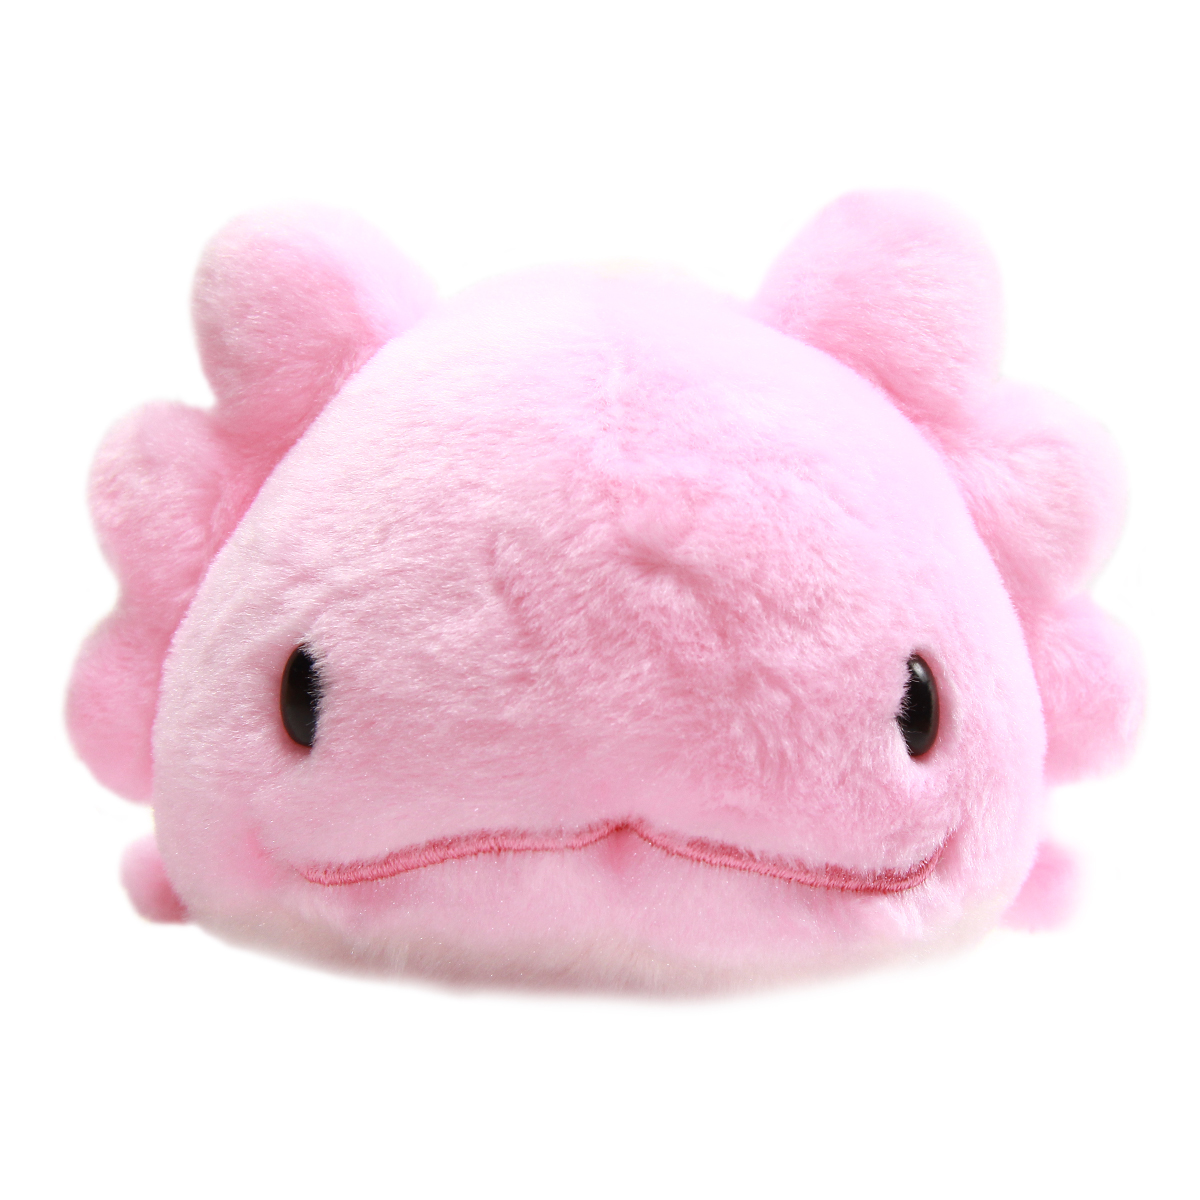 Axolotl Plushie Super Soft Squishy Stuffed Animal Toy Pink Size 6 Inches